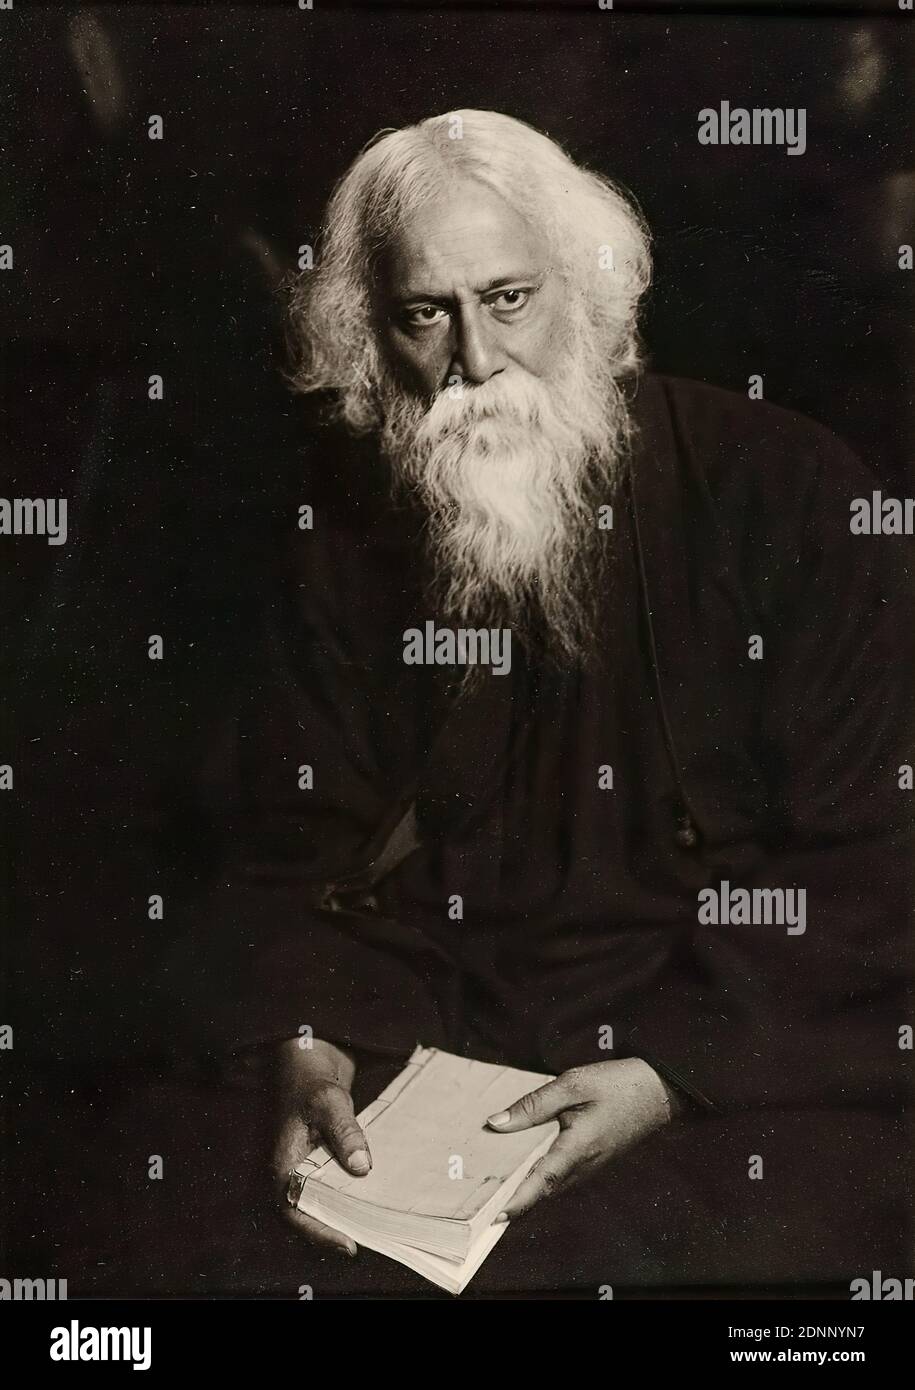 Hugo Erfurth, Rabindranath Tagore, from the album Ausstellung Hugo Erfurth - Bildnisse aus dem XX. Jahrhundert, Konstanz 1949, silver gelatin paper, black and white positive process, picture size: height: 17,1 cm; width: 12,4 cm, inscribed: Passepartout recto u. re. : in lead: 16, portrait photography, portrait, writer, poet, author, book, portrait, self-portrait of an artist, scholar, philosopher, Rabindranath Tagore, At the beginning of the 20th century, Hugo Erfurth is one of the most famous professional photographers in Germany, along with Rudolph Dührkoop and Nicola Perscheid. Stock Photo